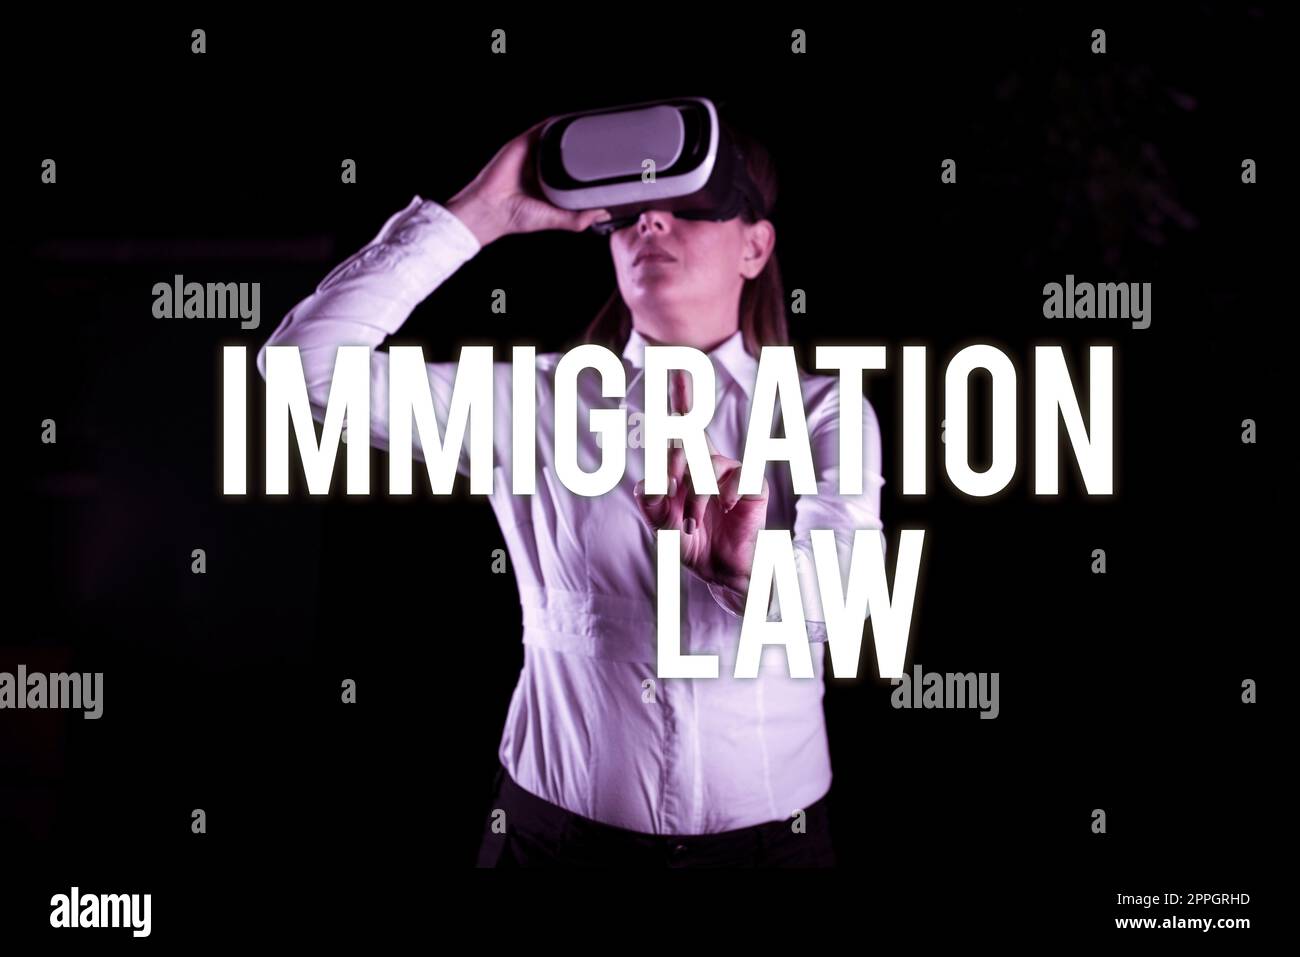 Inspiration showing sign Immigration LawEmigration of a citizen shall be lawful in making of travel. Business concept Emigration of a citizen shall be lawful in making of travel Stock Photo